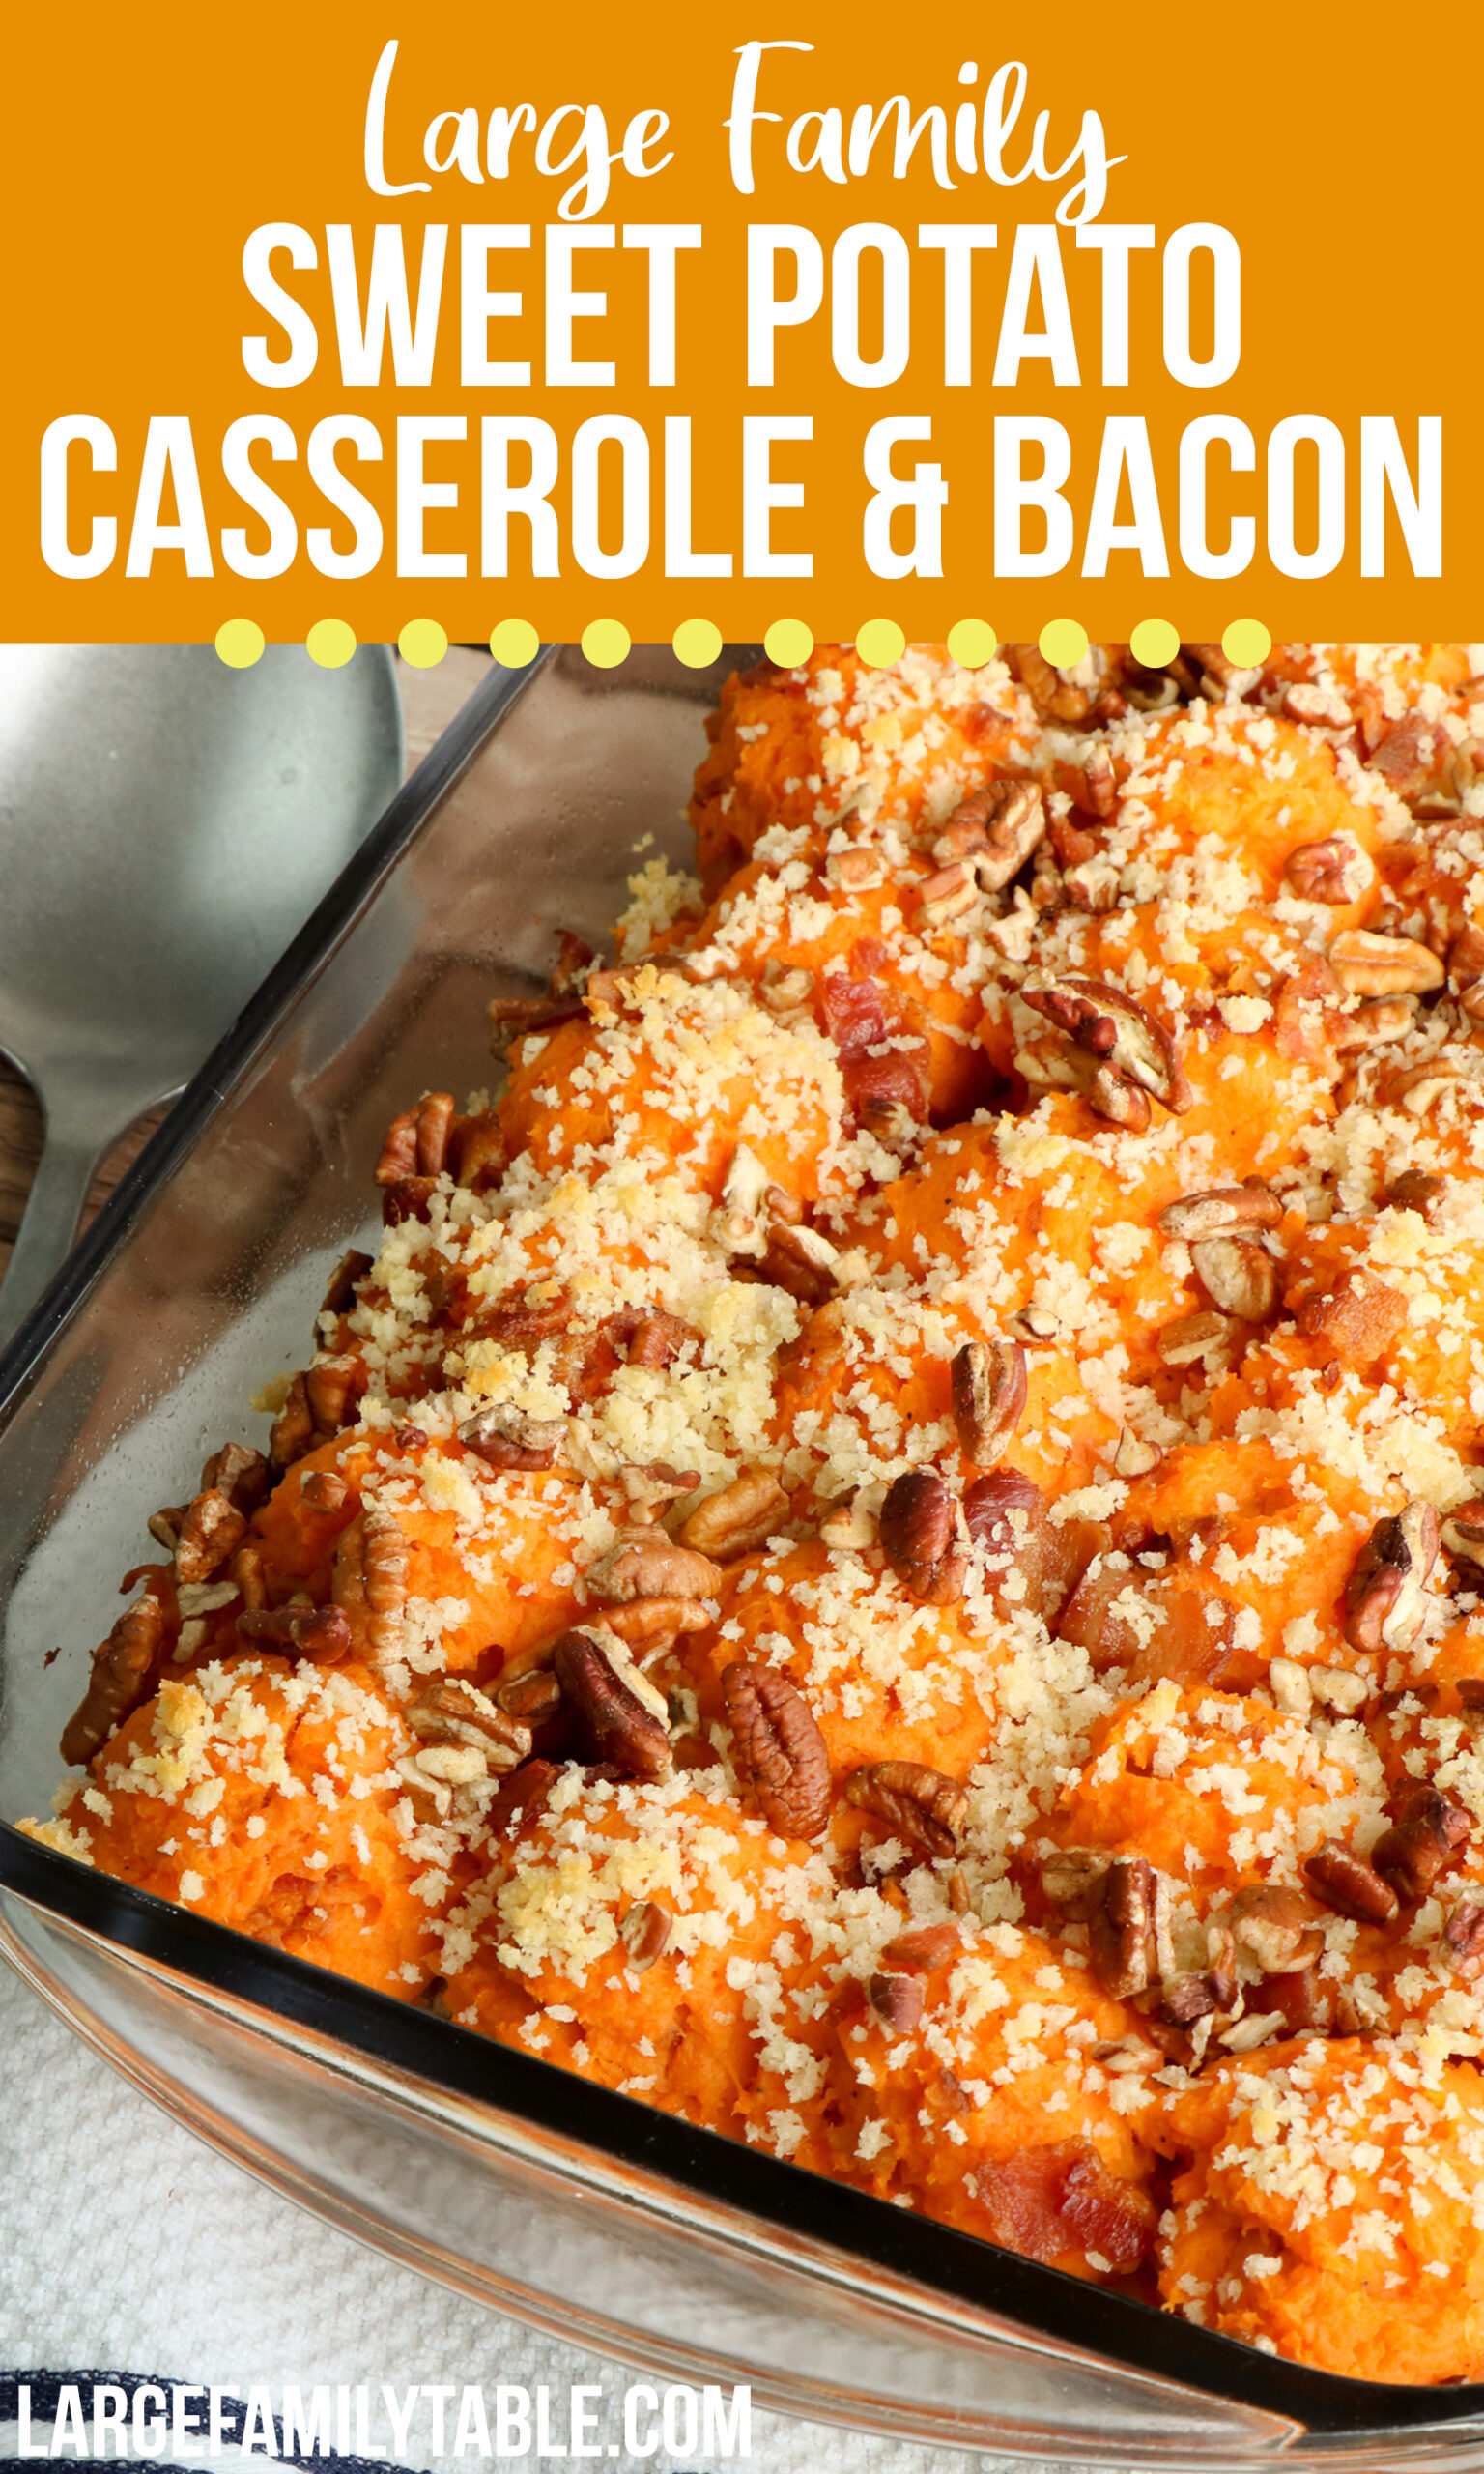 Twice Baked Sweet Potato Casserole with Bacon | Large Family Sides and ...